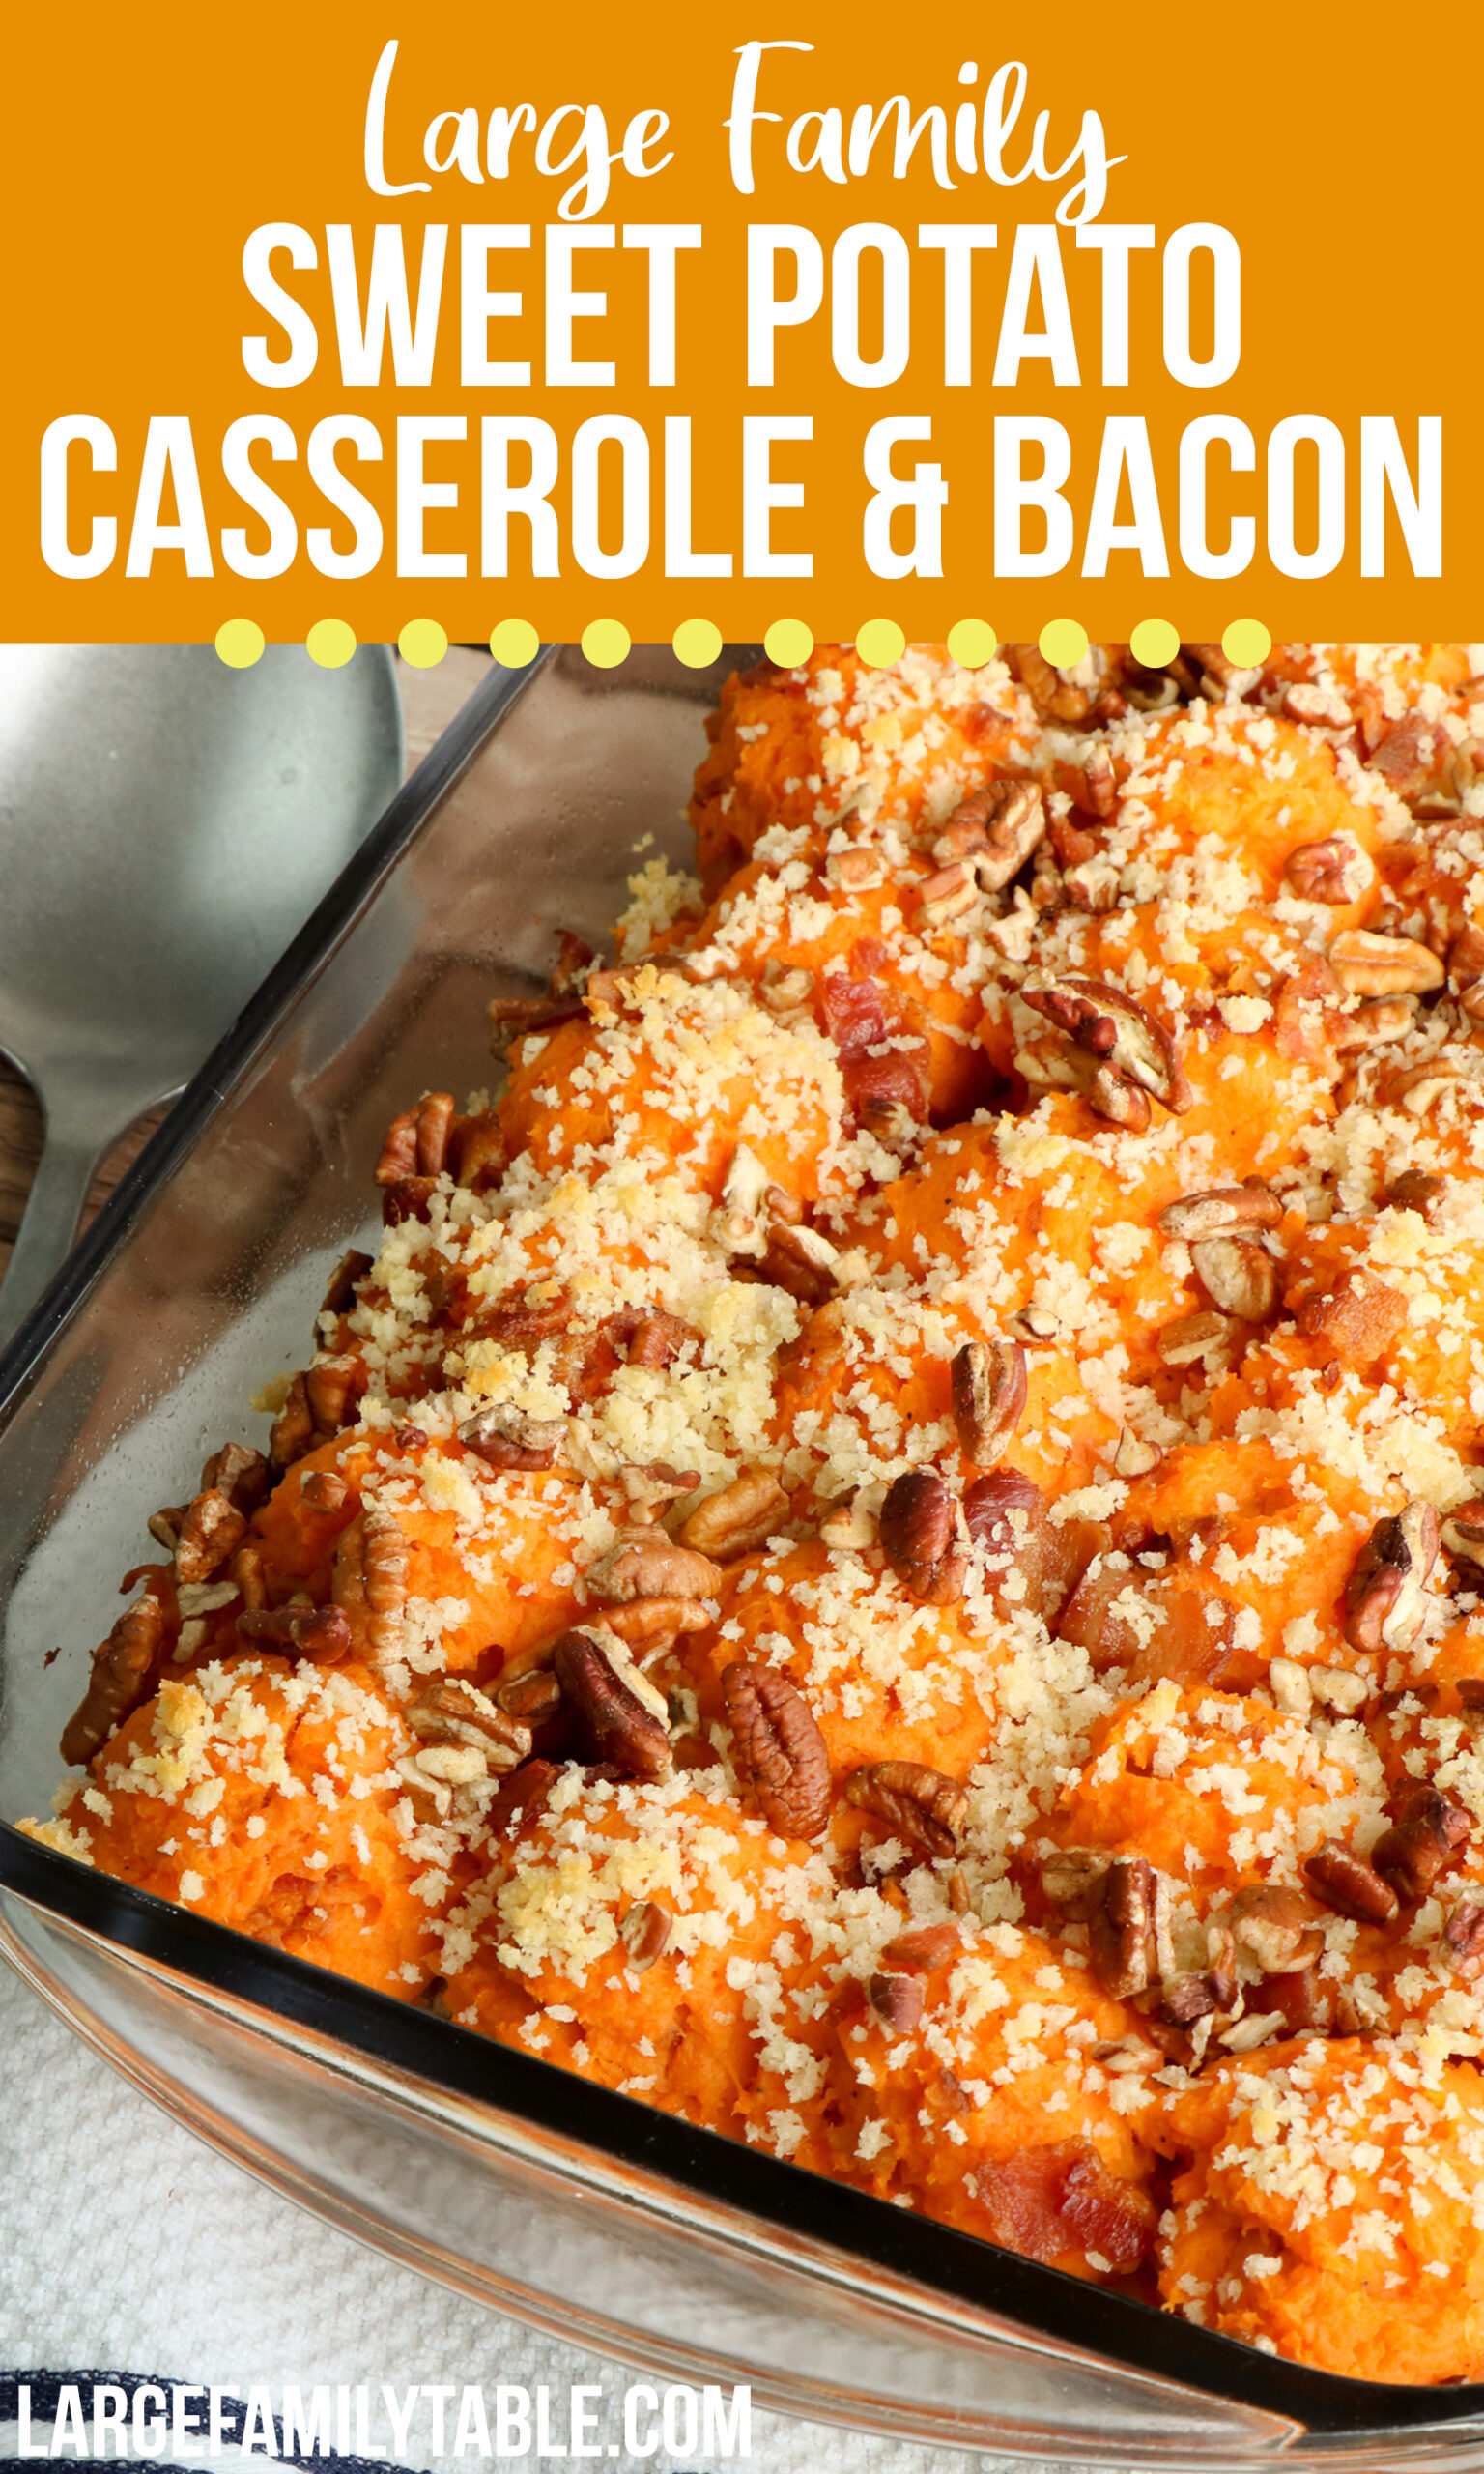 Twice Baked Sweet Potato Casserole with Bacon | Large Family Sides and ...